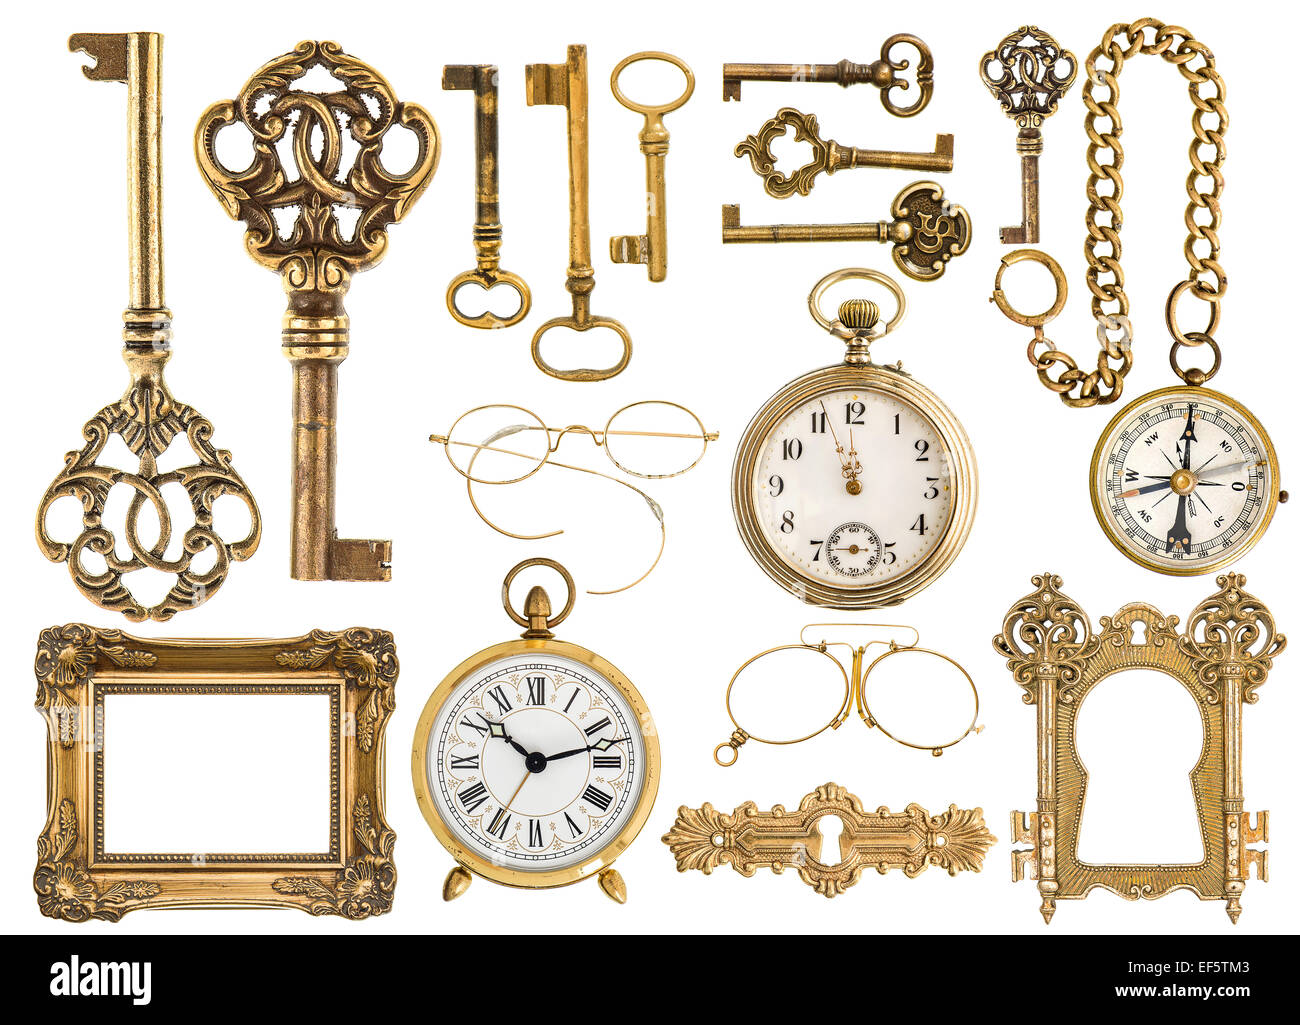 golden antique accessories. baroque frame, vintage keys, clock, compass, retro glasses, pocket watch isolated on white backgroun Stock Photo